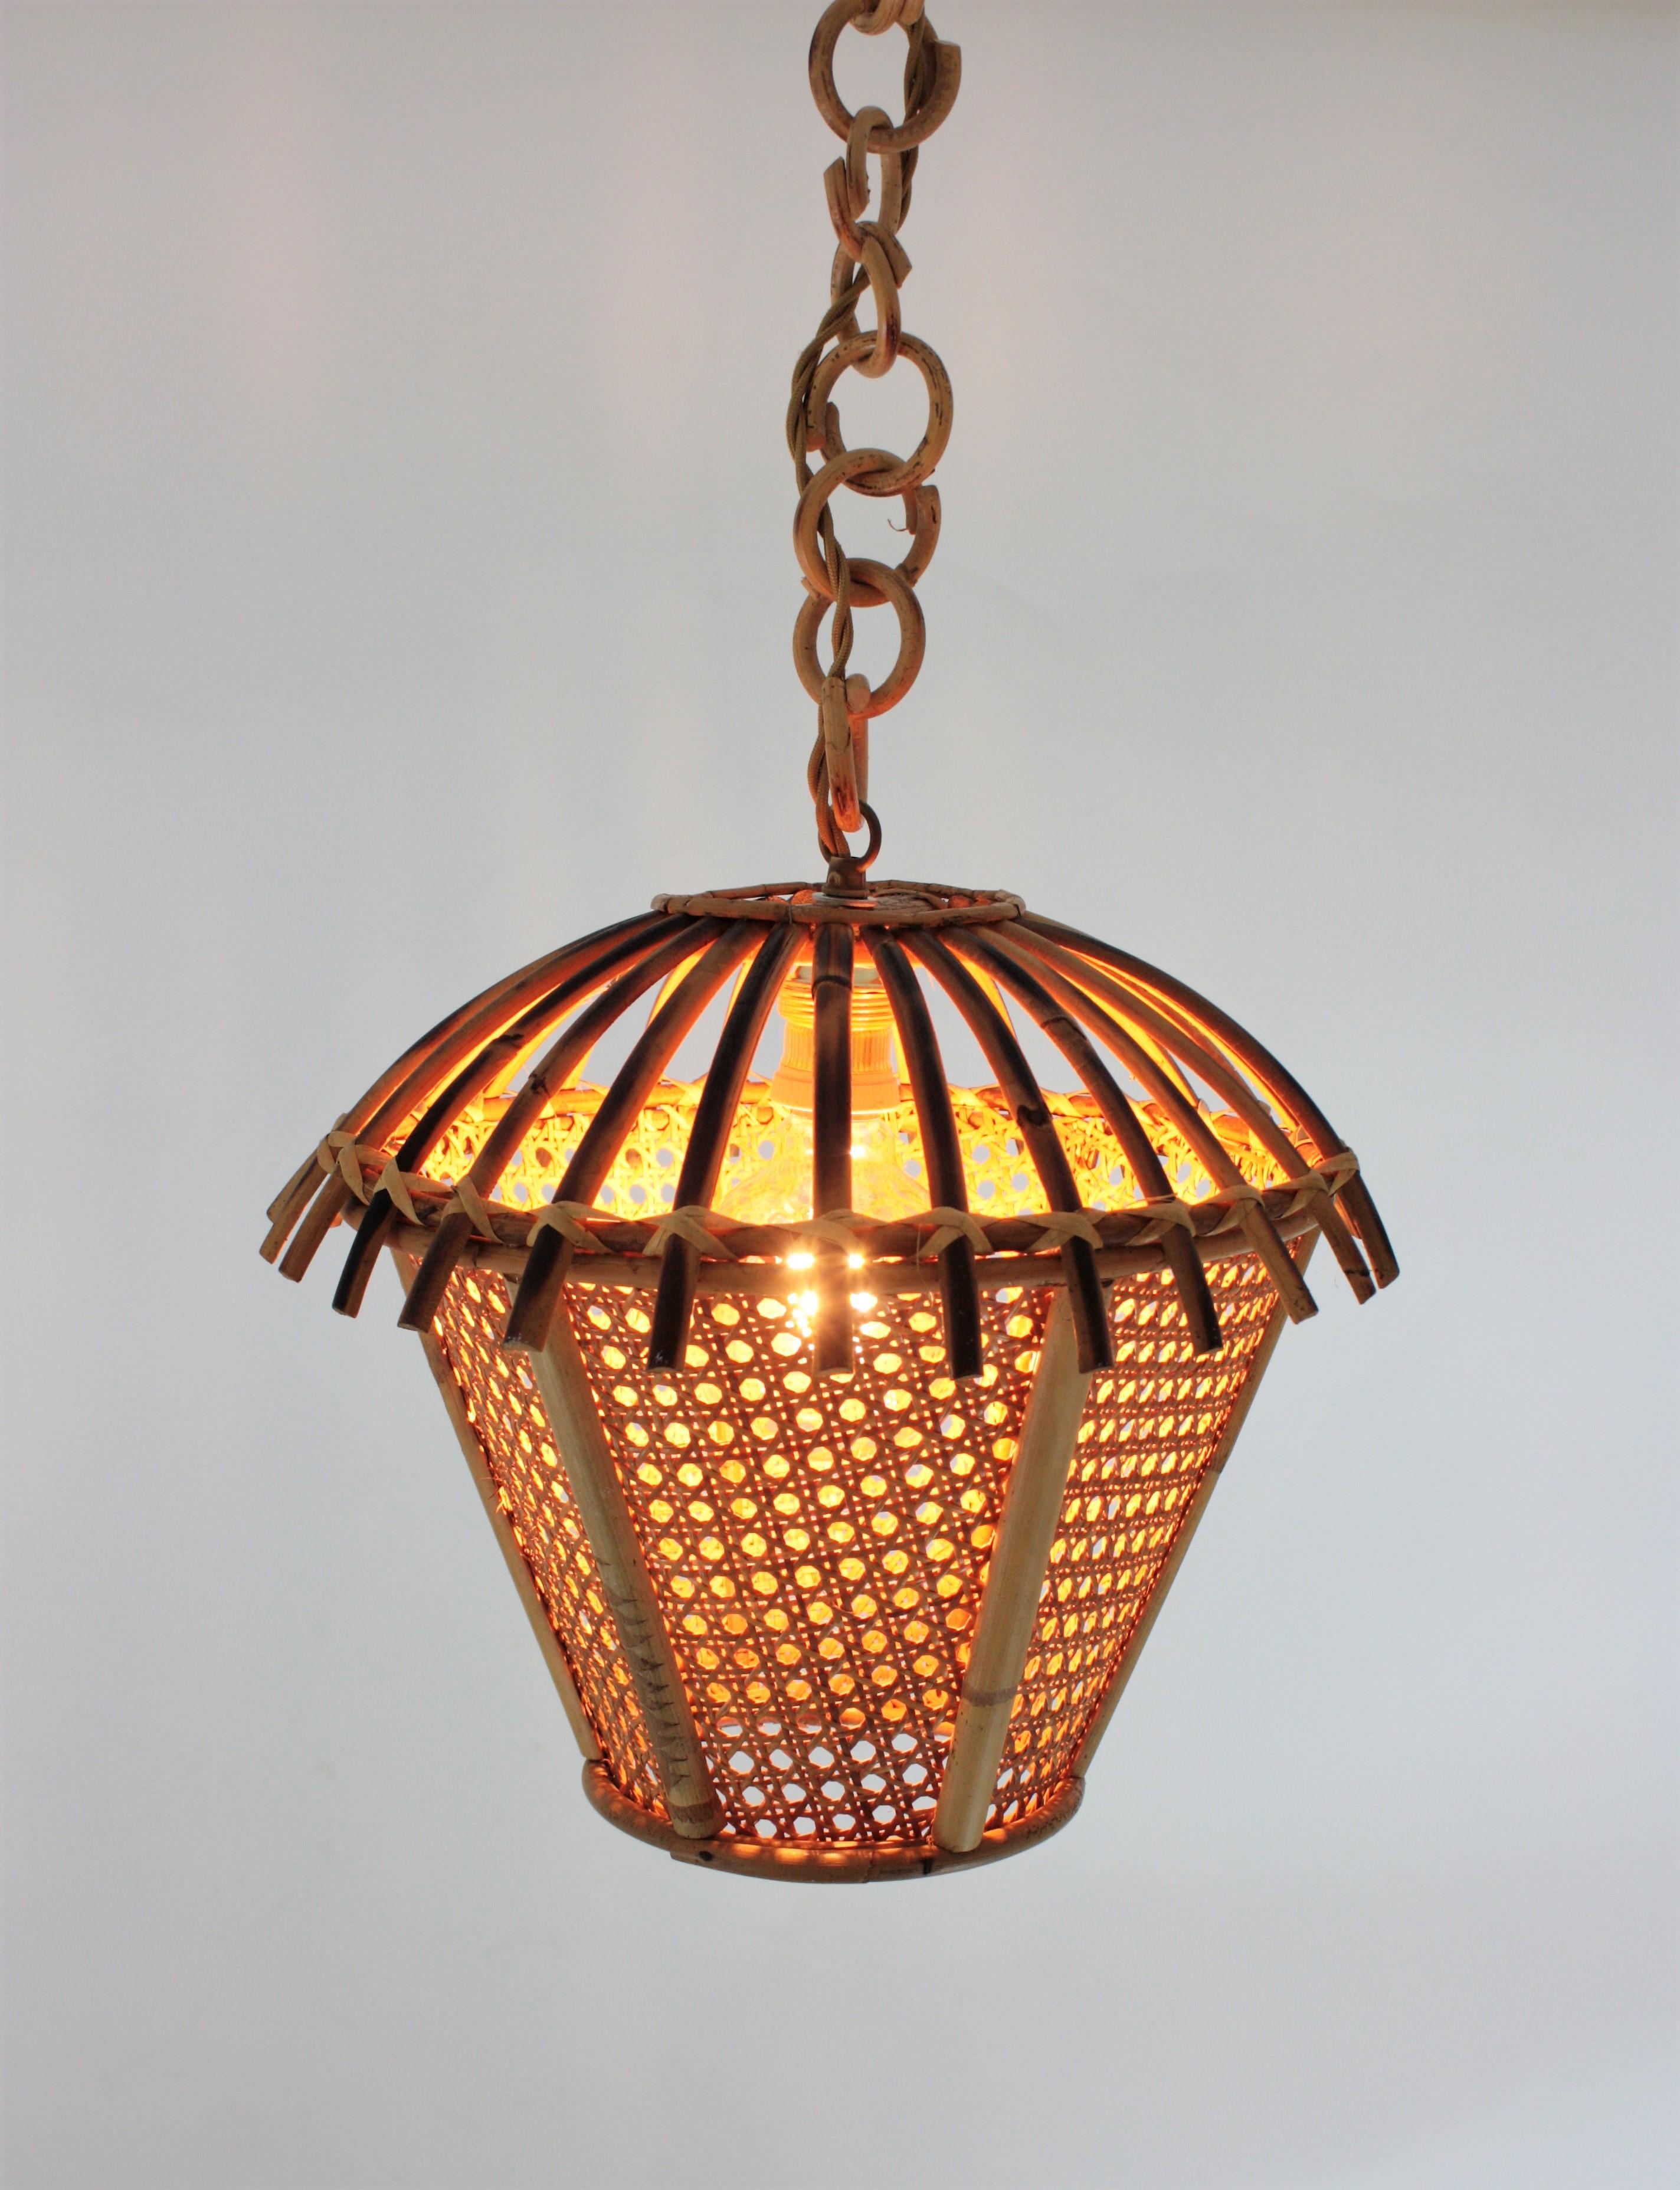 Italian Modernist Rattan and Wicker Wire Pagoda Pendant or Hanging Light, 1960s For Sale 9